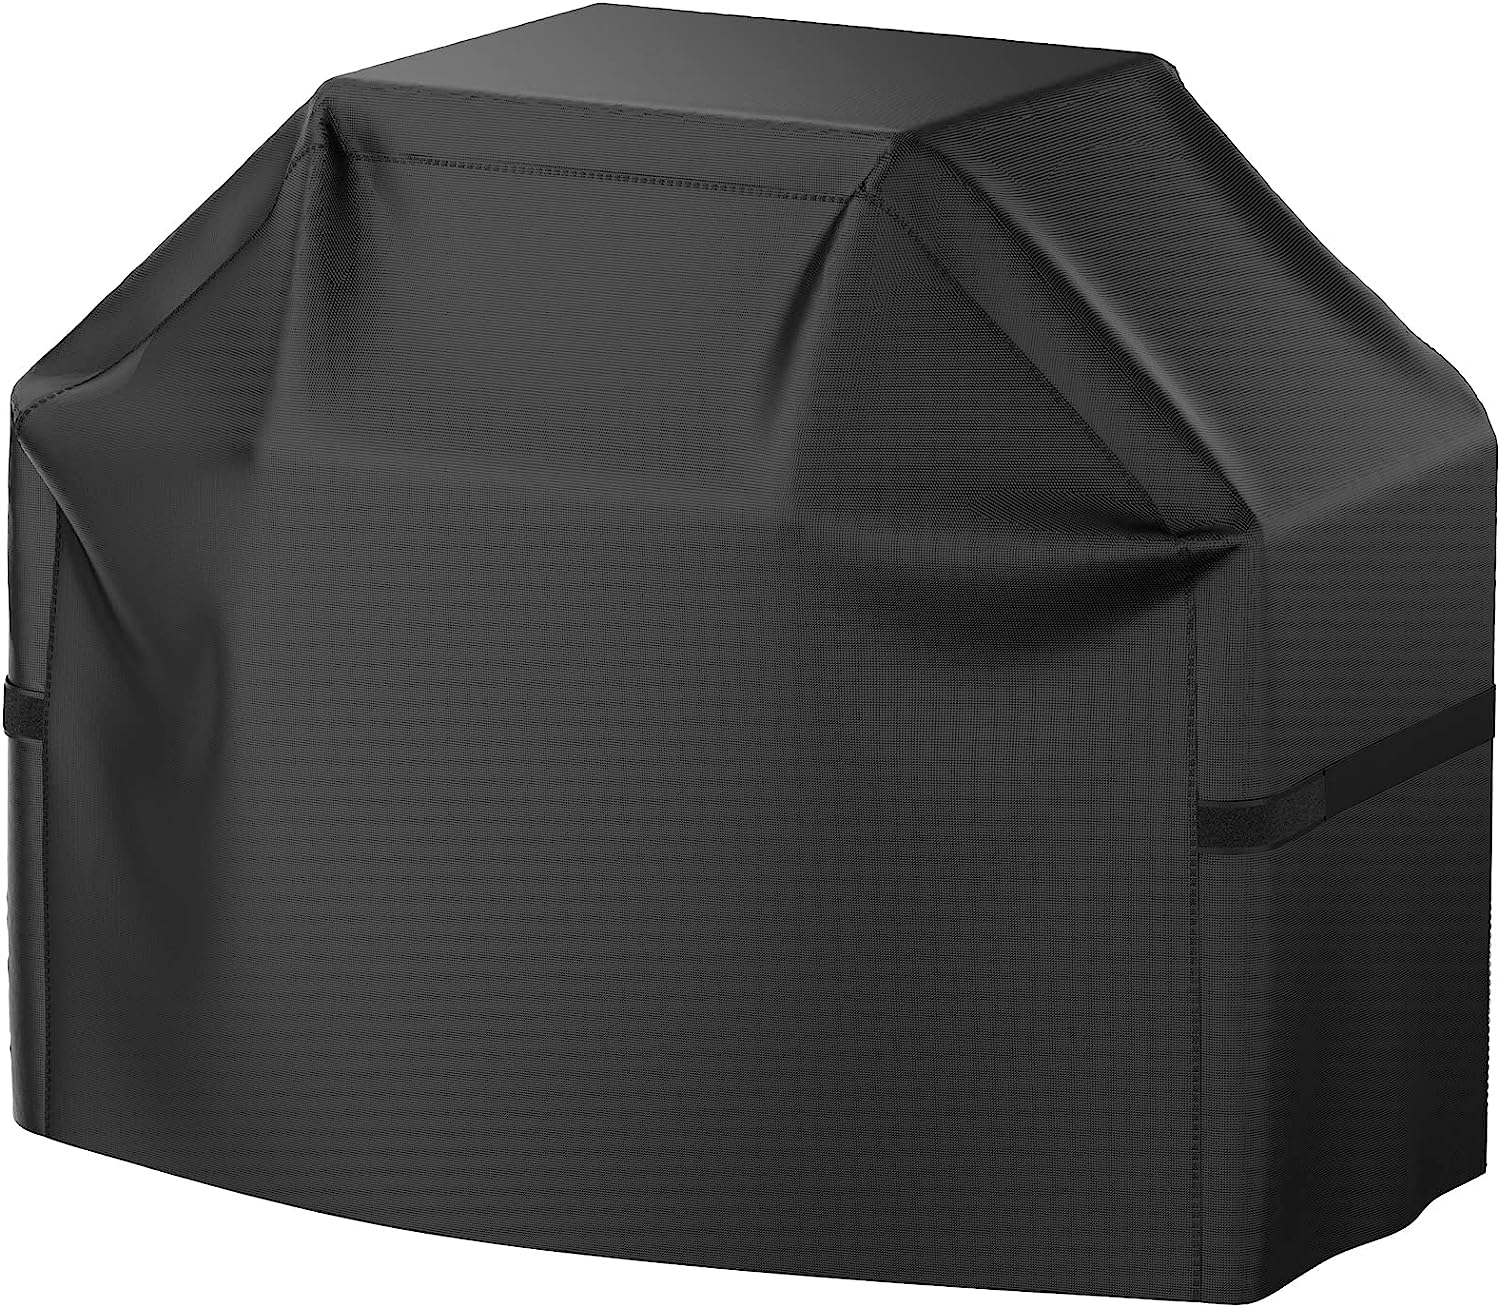 VIBOOS Grill Cover, 58 inch BBQ Gas Grill Cover Waterproof Weather Resistant